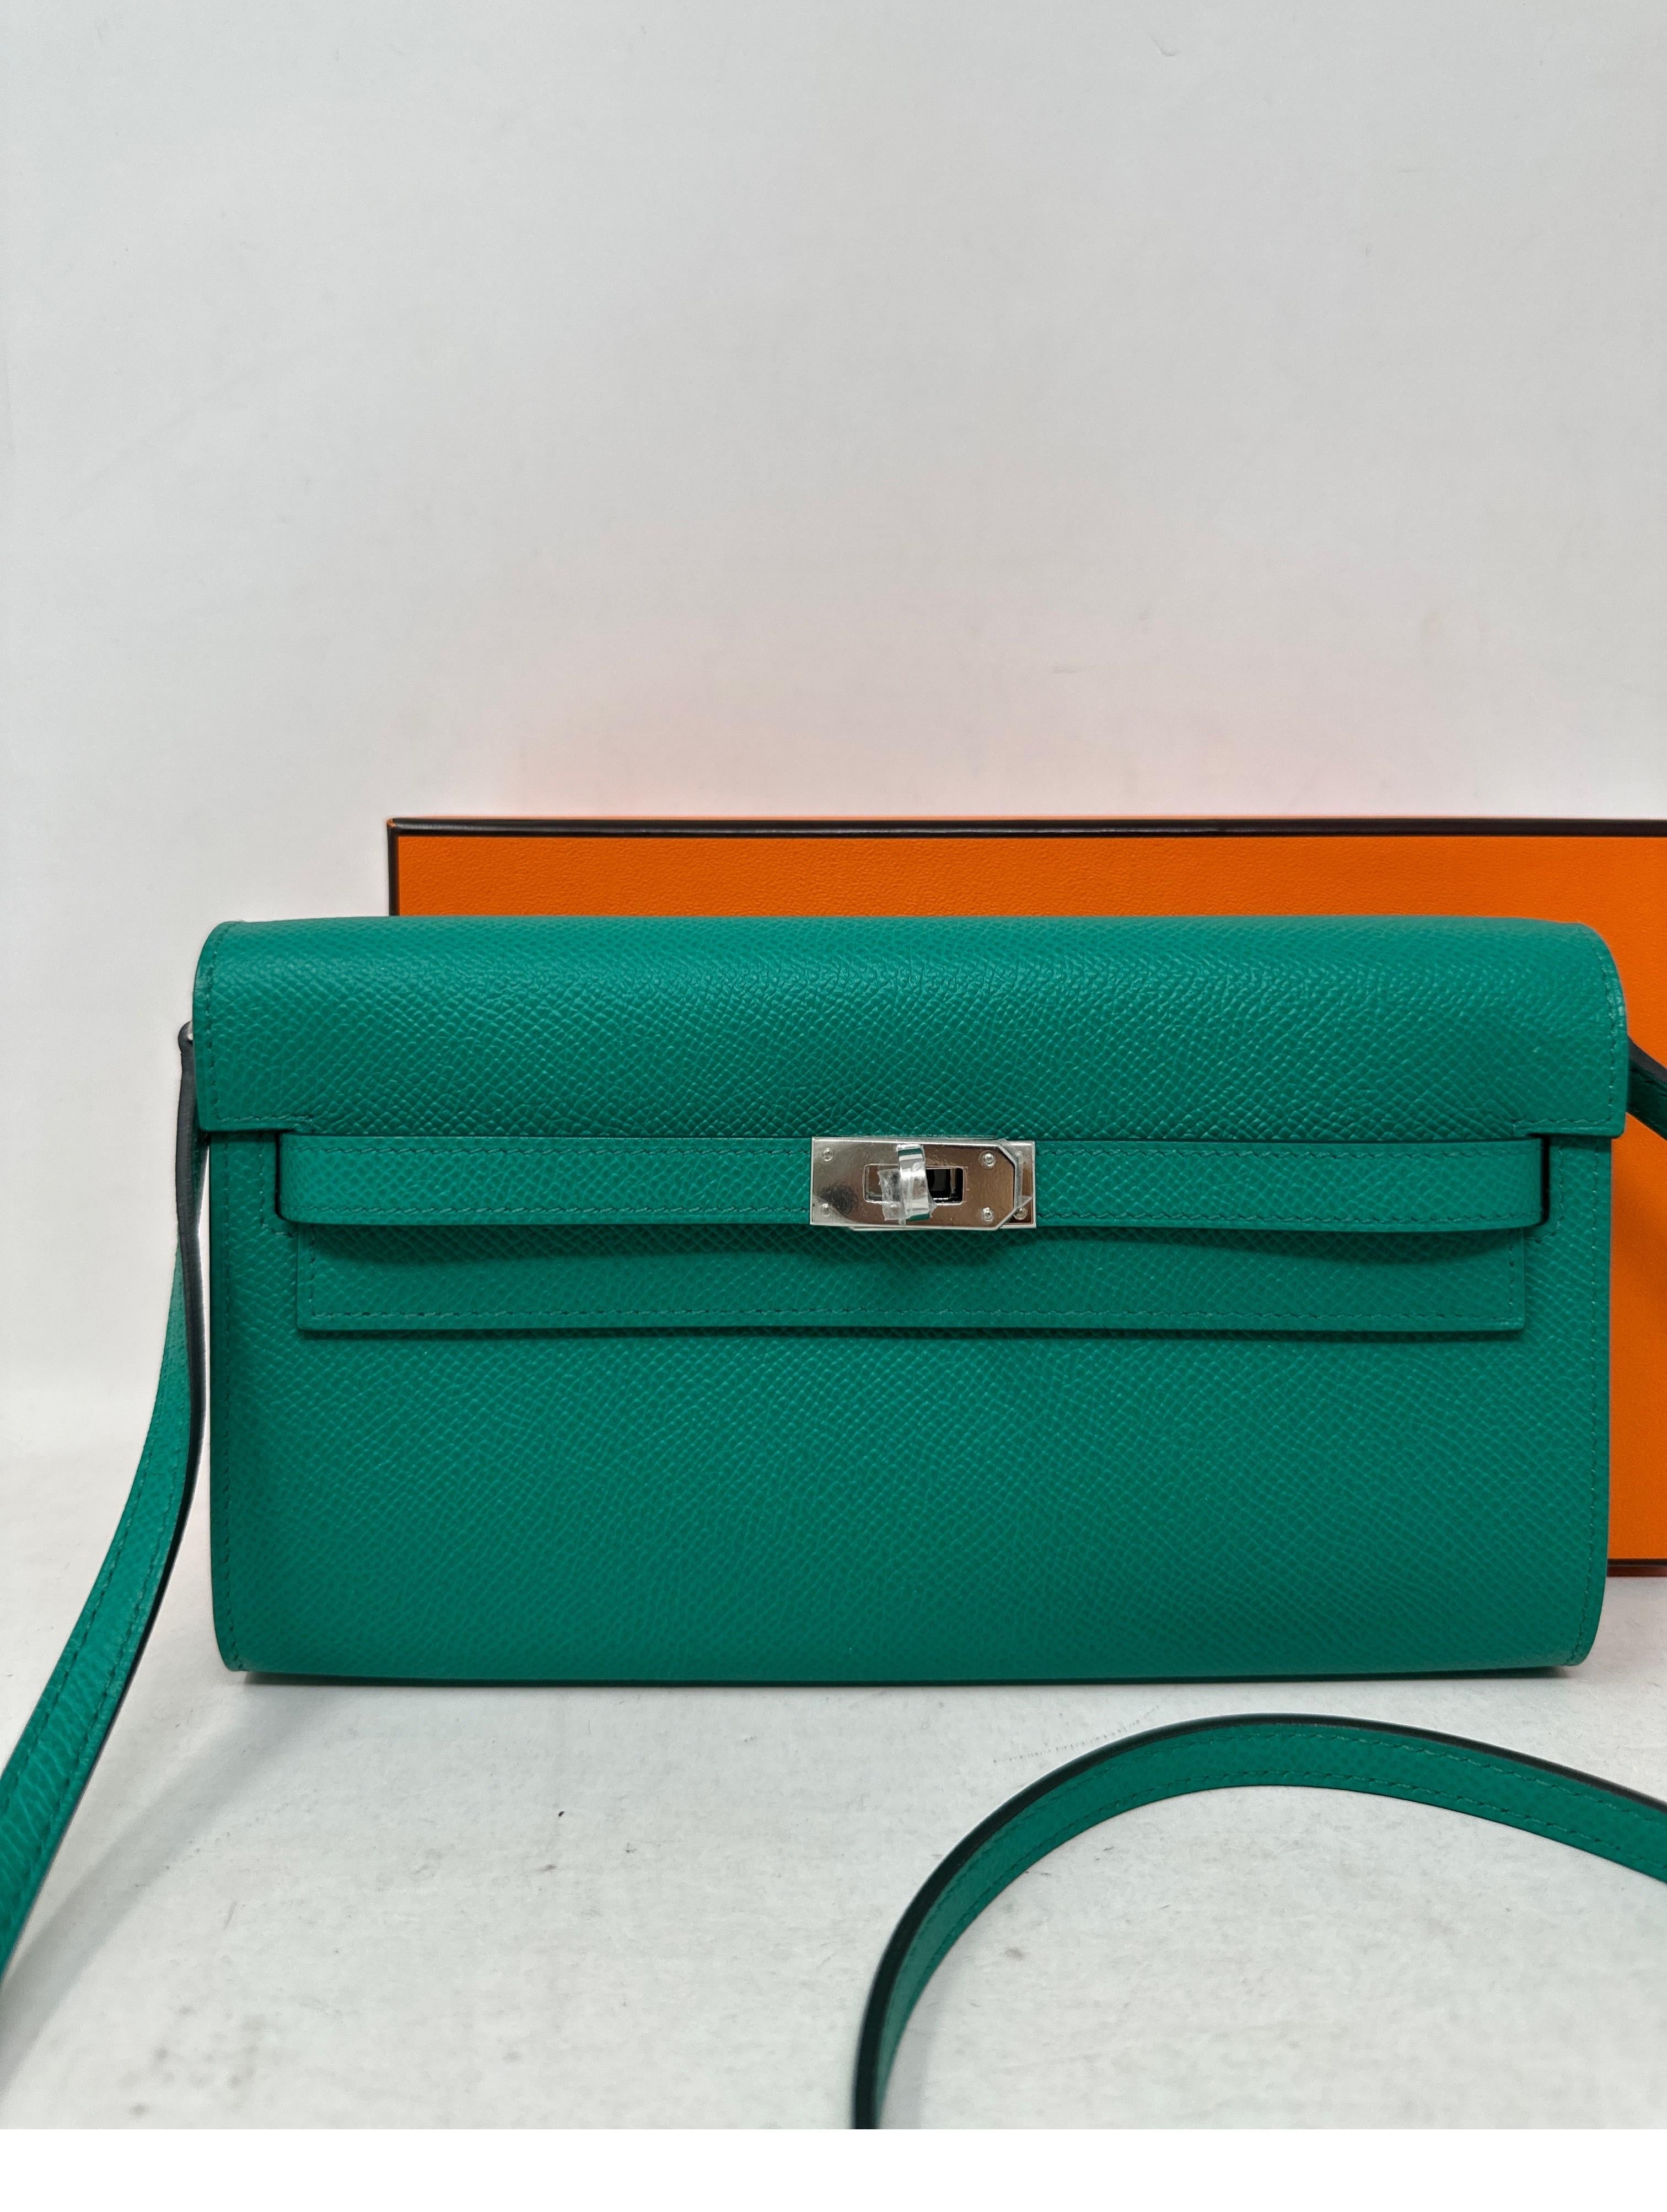 Hermes Kelly Wallet To Go Vert Green Crossbody bag. New from 2023. Vert jade color with palladium hardware. Plastic still on hardware. Full set with box. Great gift item. Brand new condition. Can be worn as a clutch or as a crossbody bag. Guaranteed